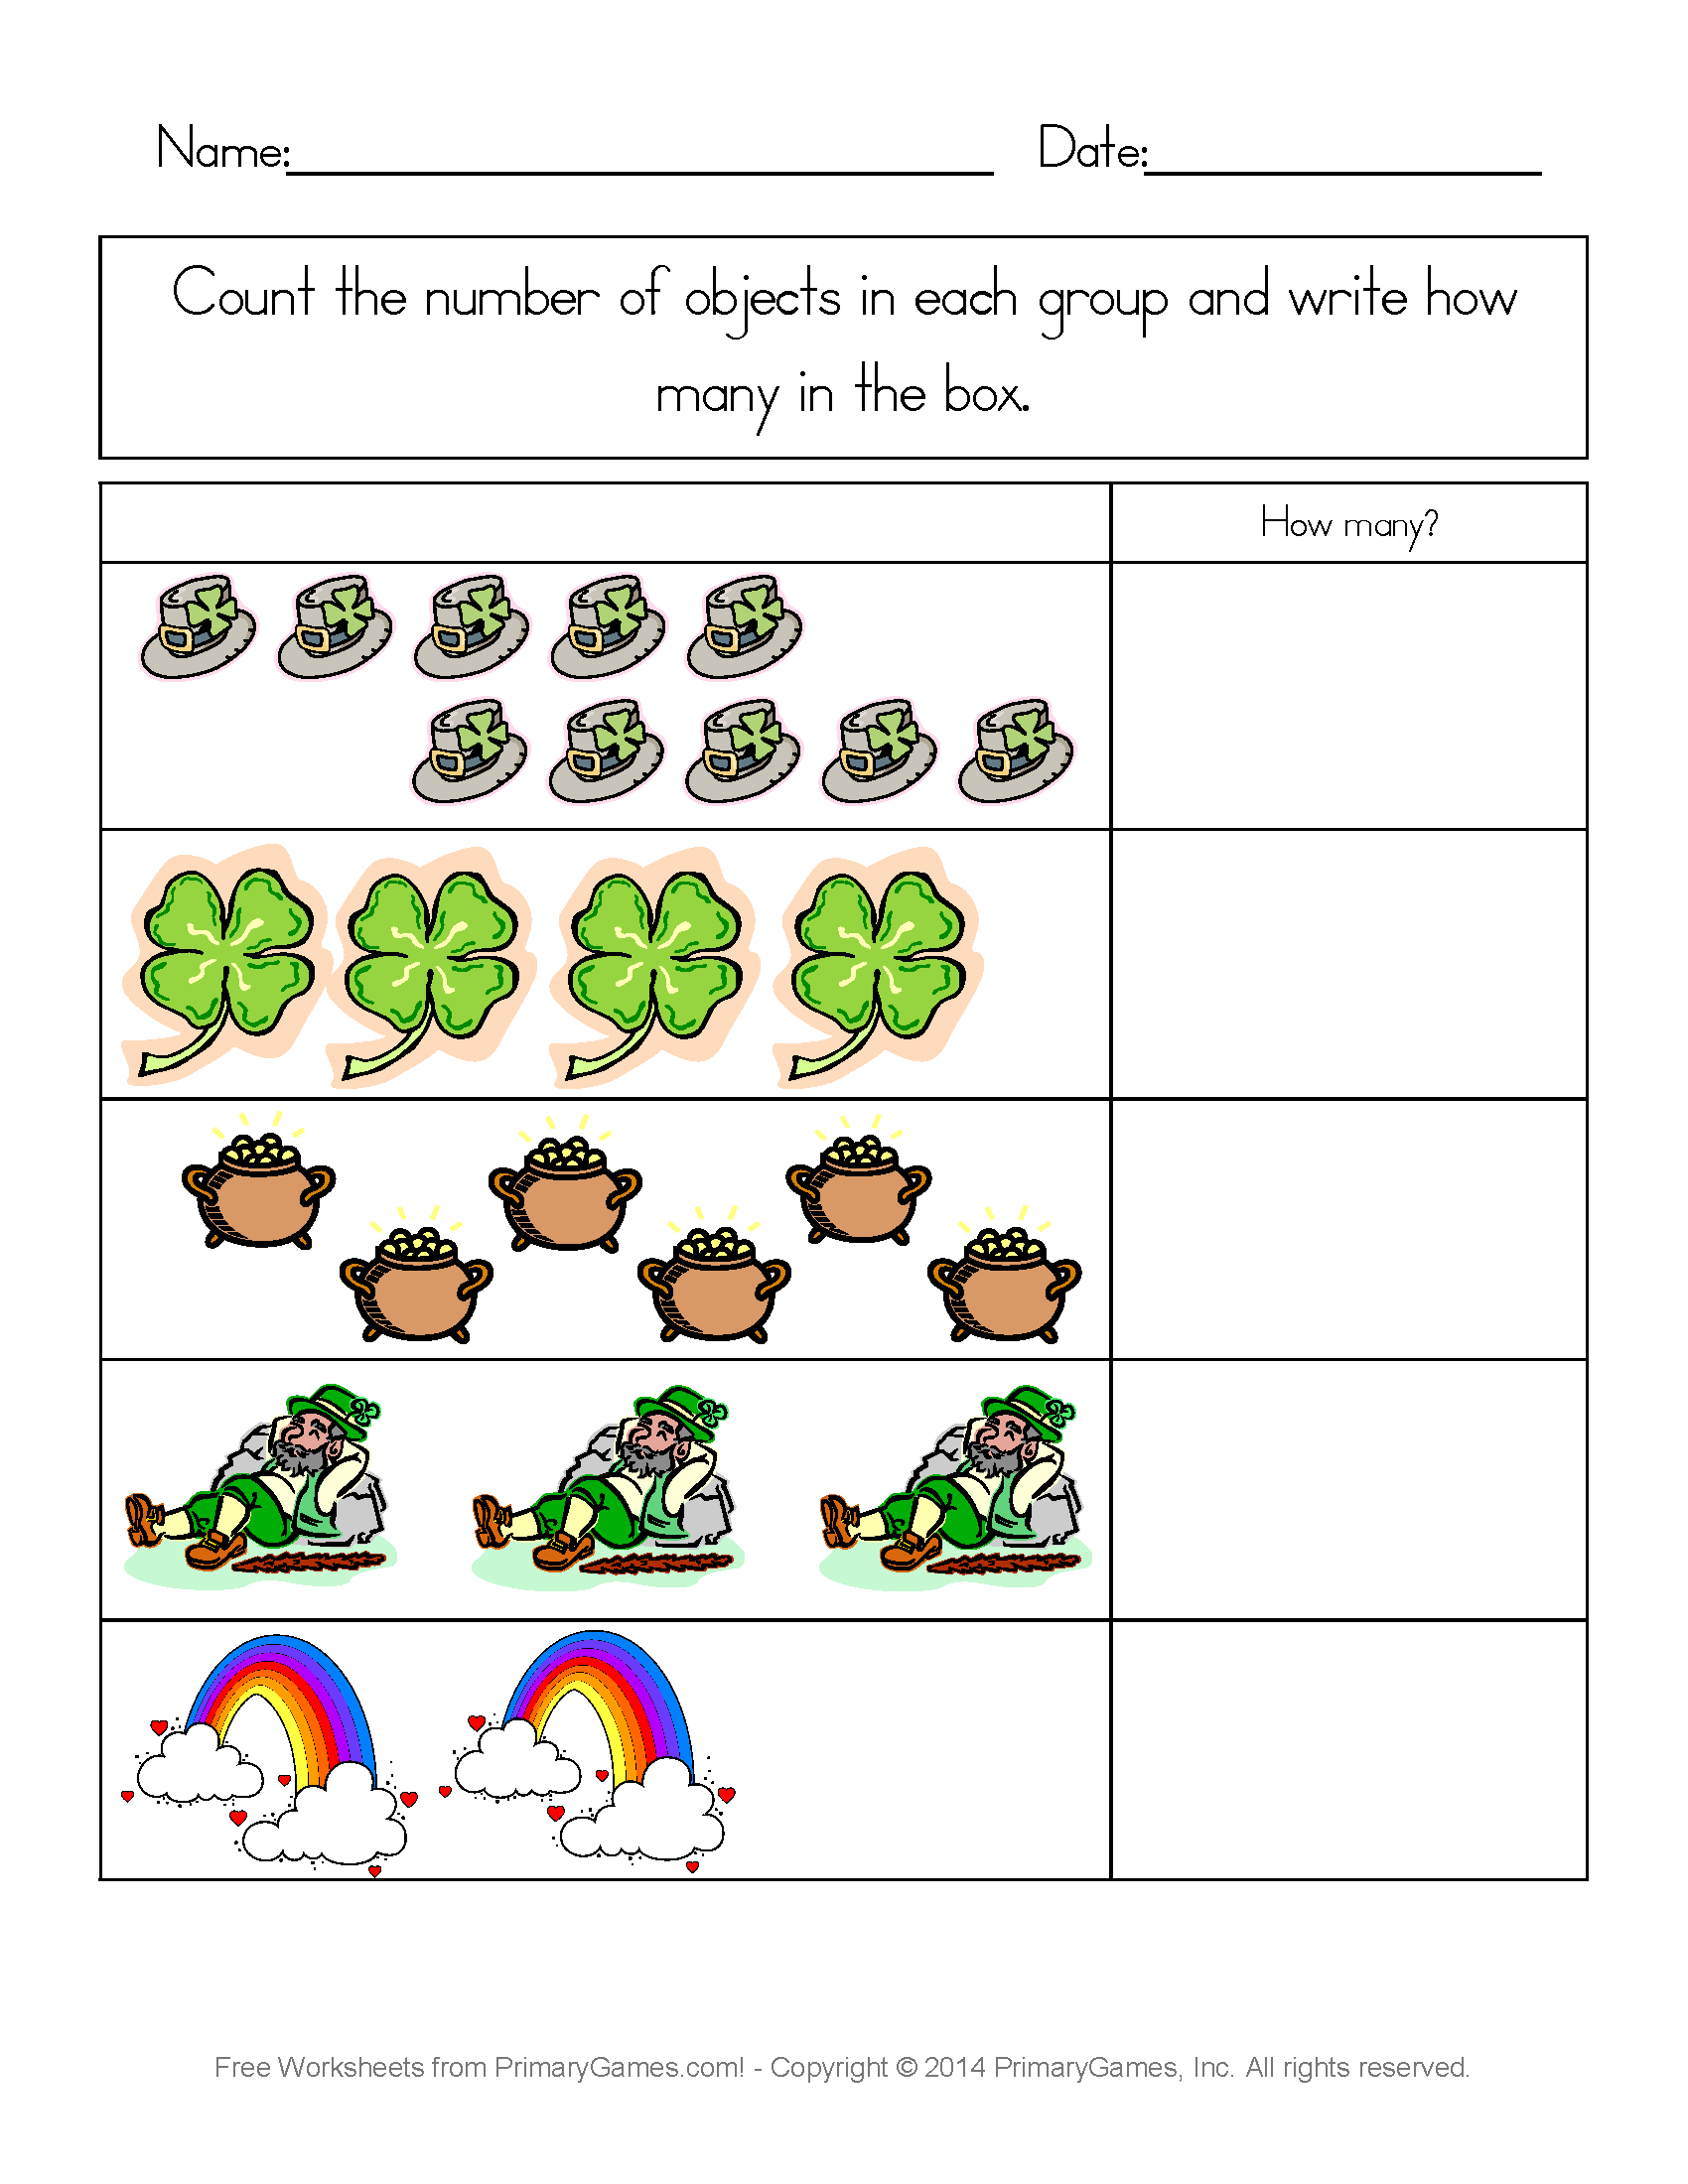 St. Patrick&amp;#039;s Day Worksheets: St. Patrick&amp;#039;s Day Counting Practice - Free Printable St Patrick&amp;amp;#039;s Day Mazes